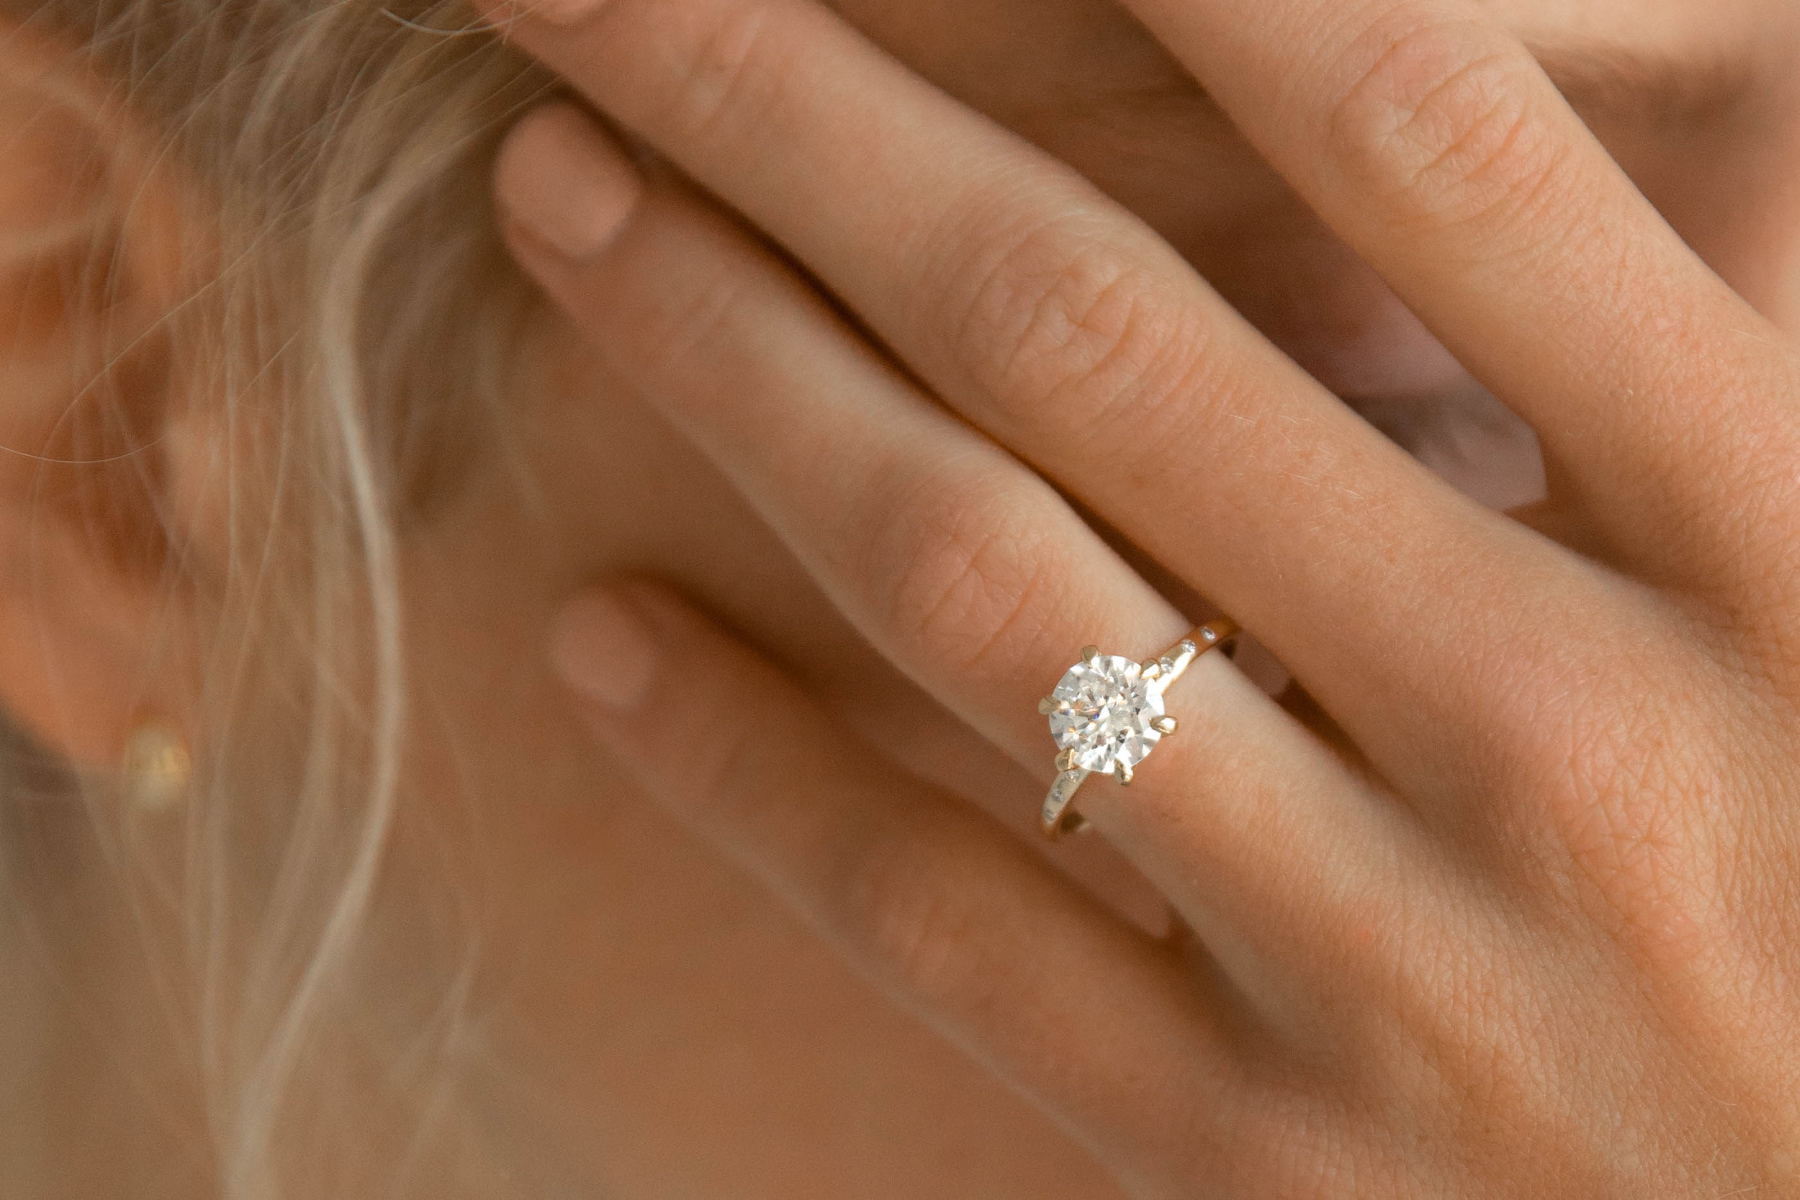 Ring Resizing: How to Change Your Ring with Your Life Changes